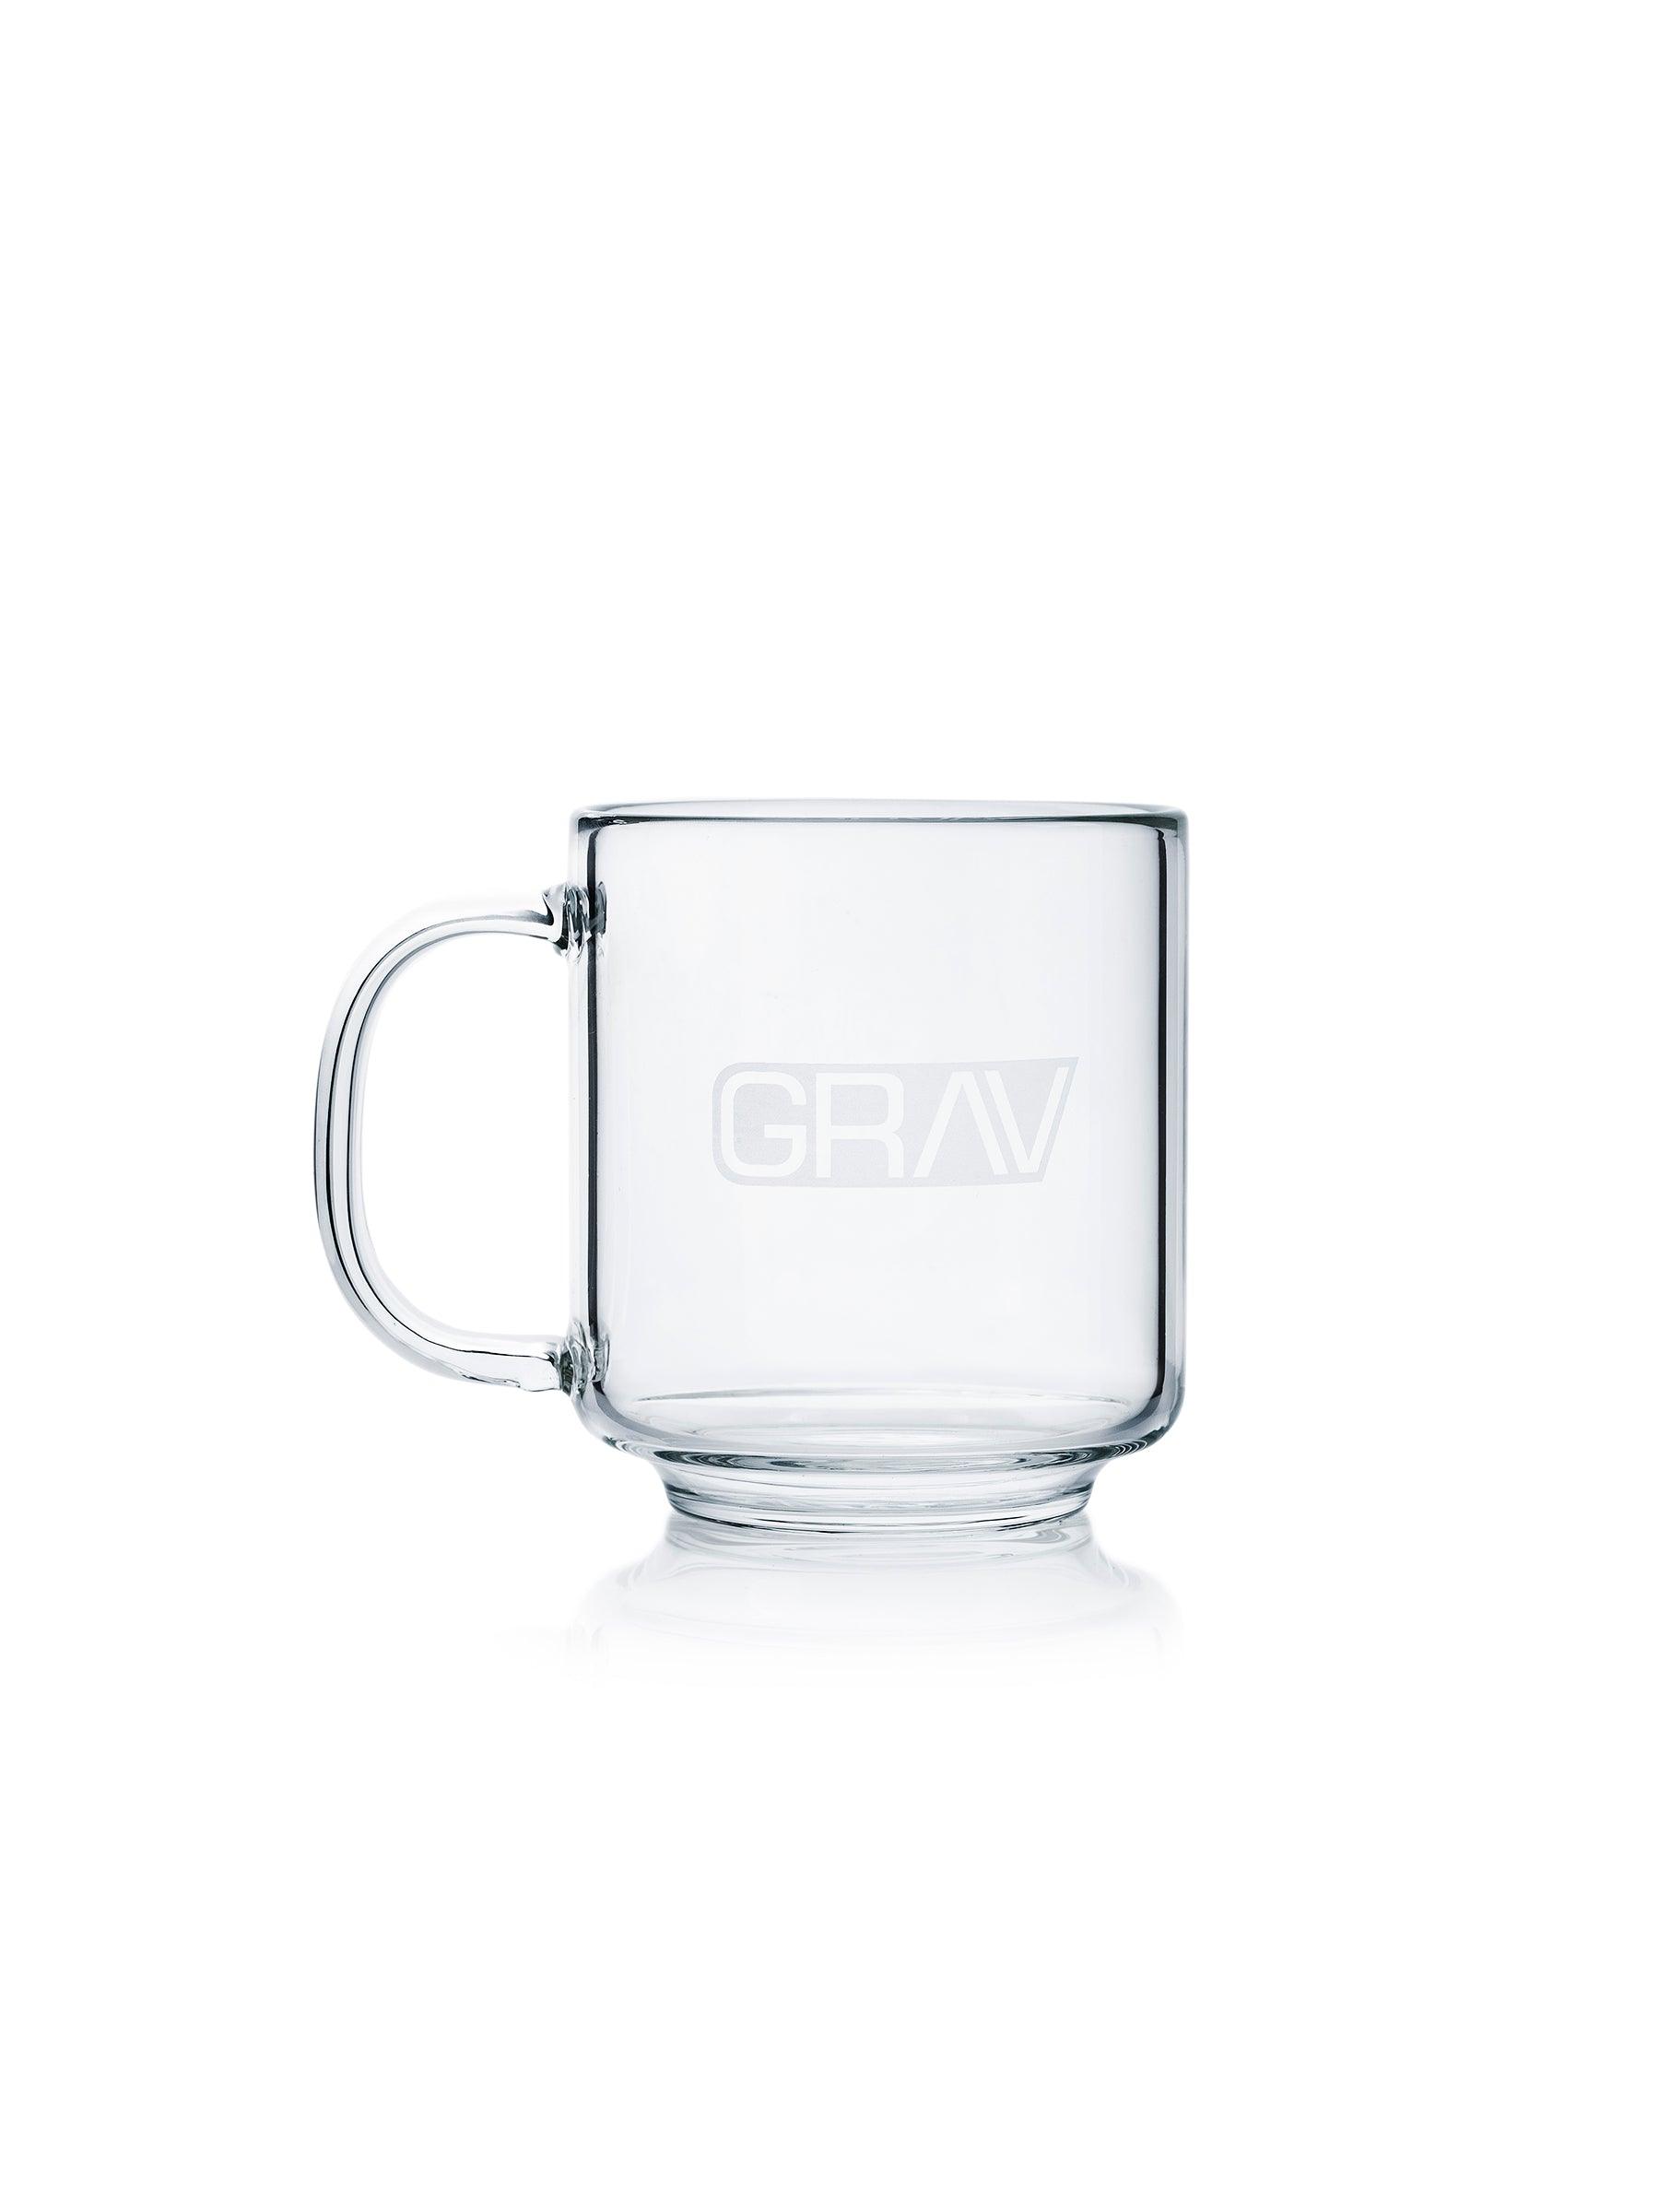 Is It Friday Yet? Glass Mug | Funny Glass Mugs | Talking Out of Turn